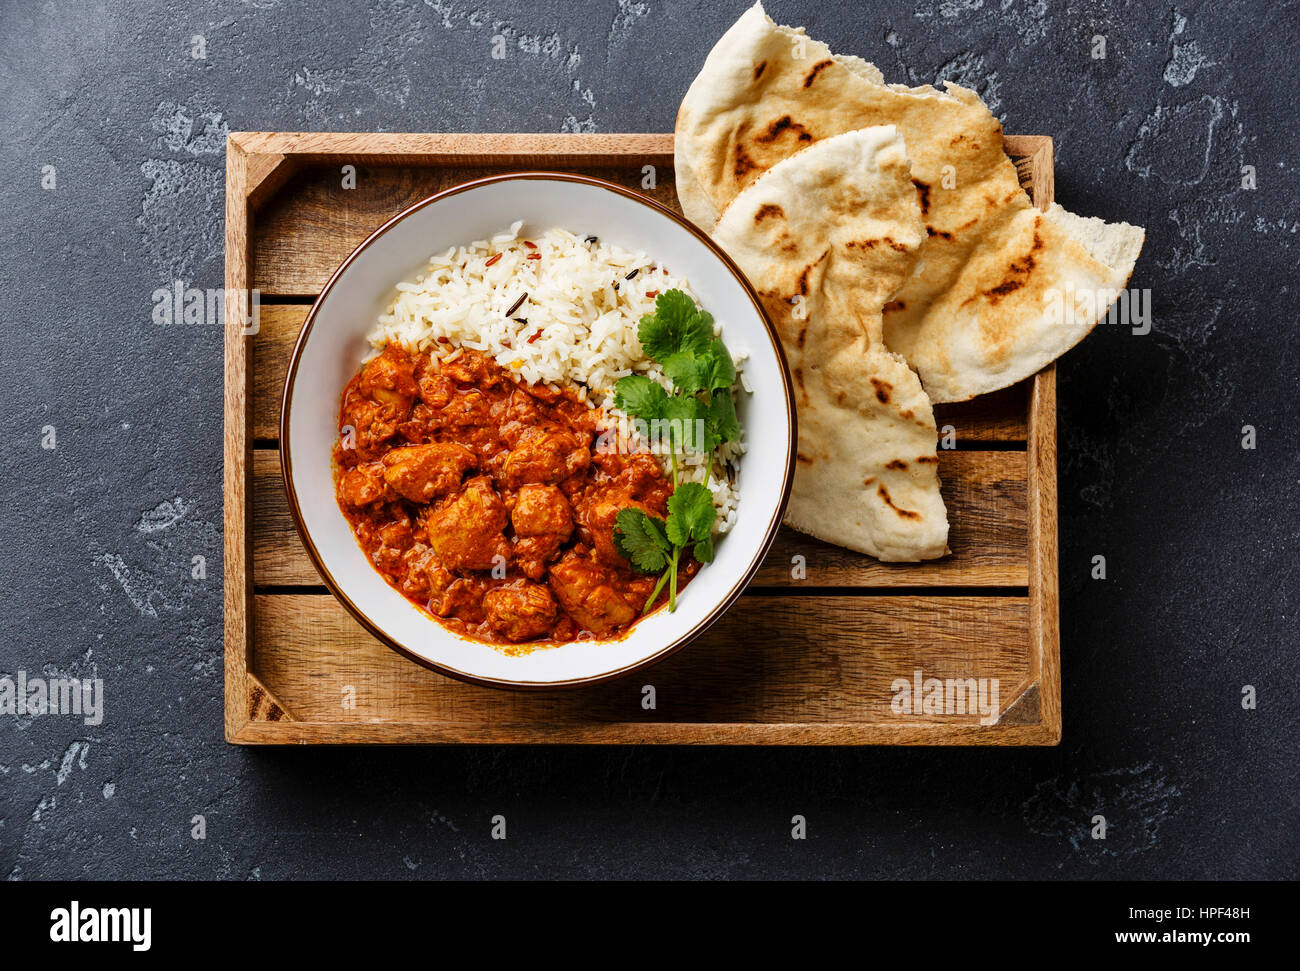 Chicken tikka masala spicy curry meat food with rice and fresh naan bread in wooden tray on black stone background Stock Photo